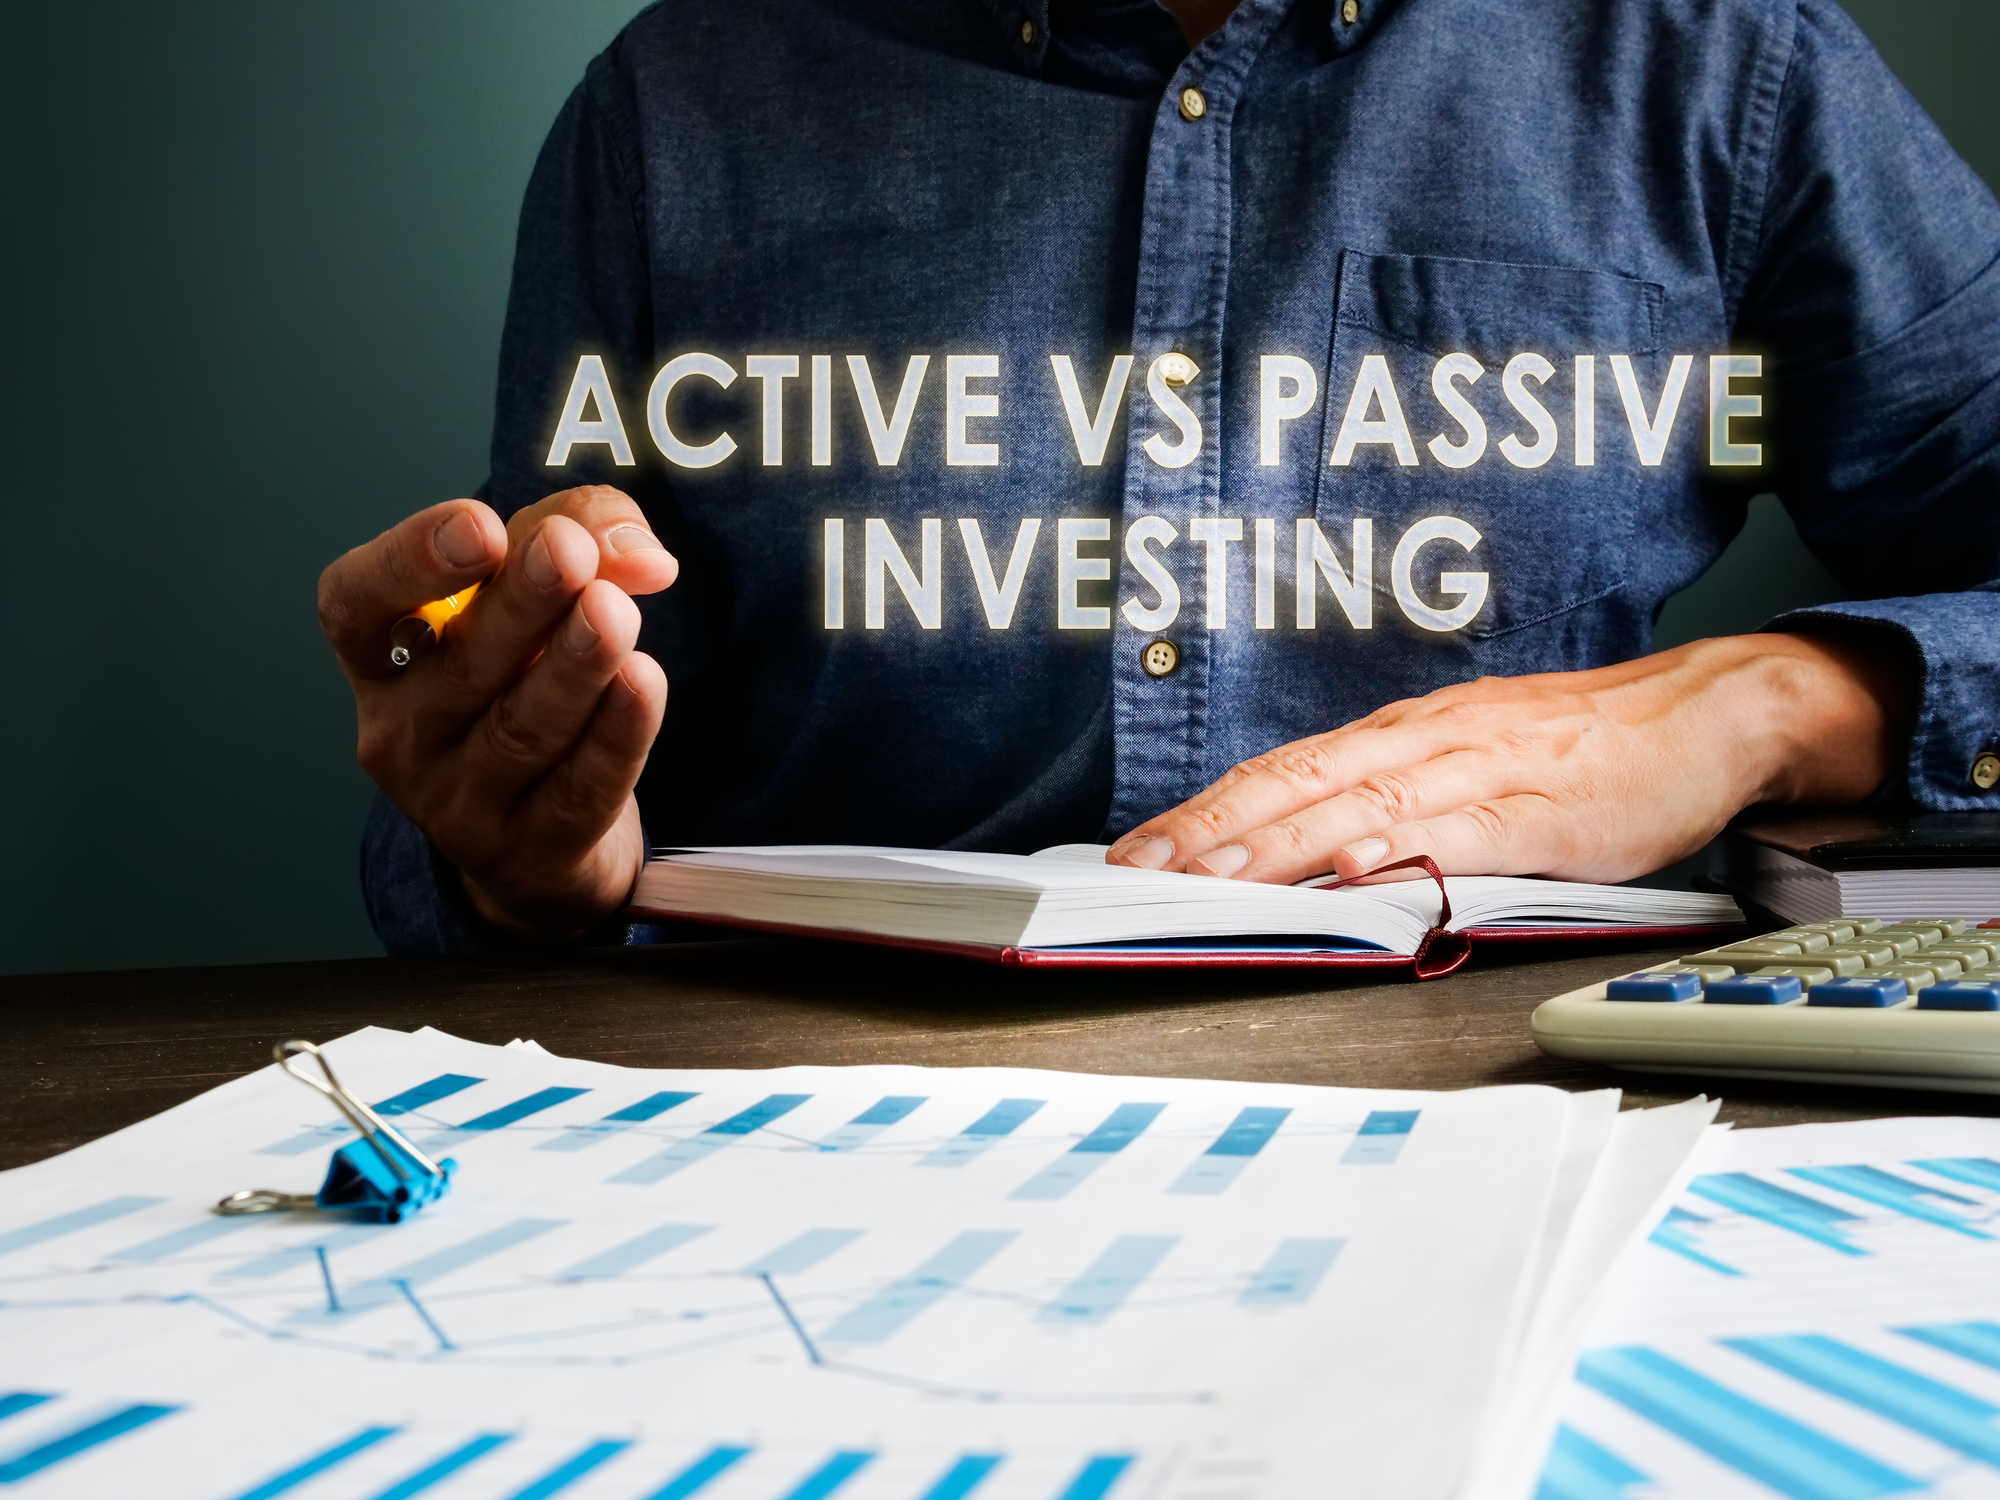 Active Investing vs Passive Investing: Which Method Will Emerge Victorious in 2022?